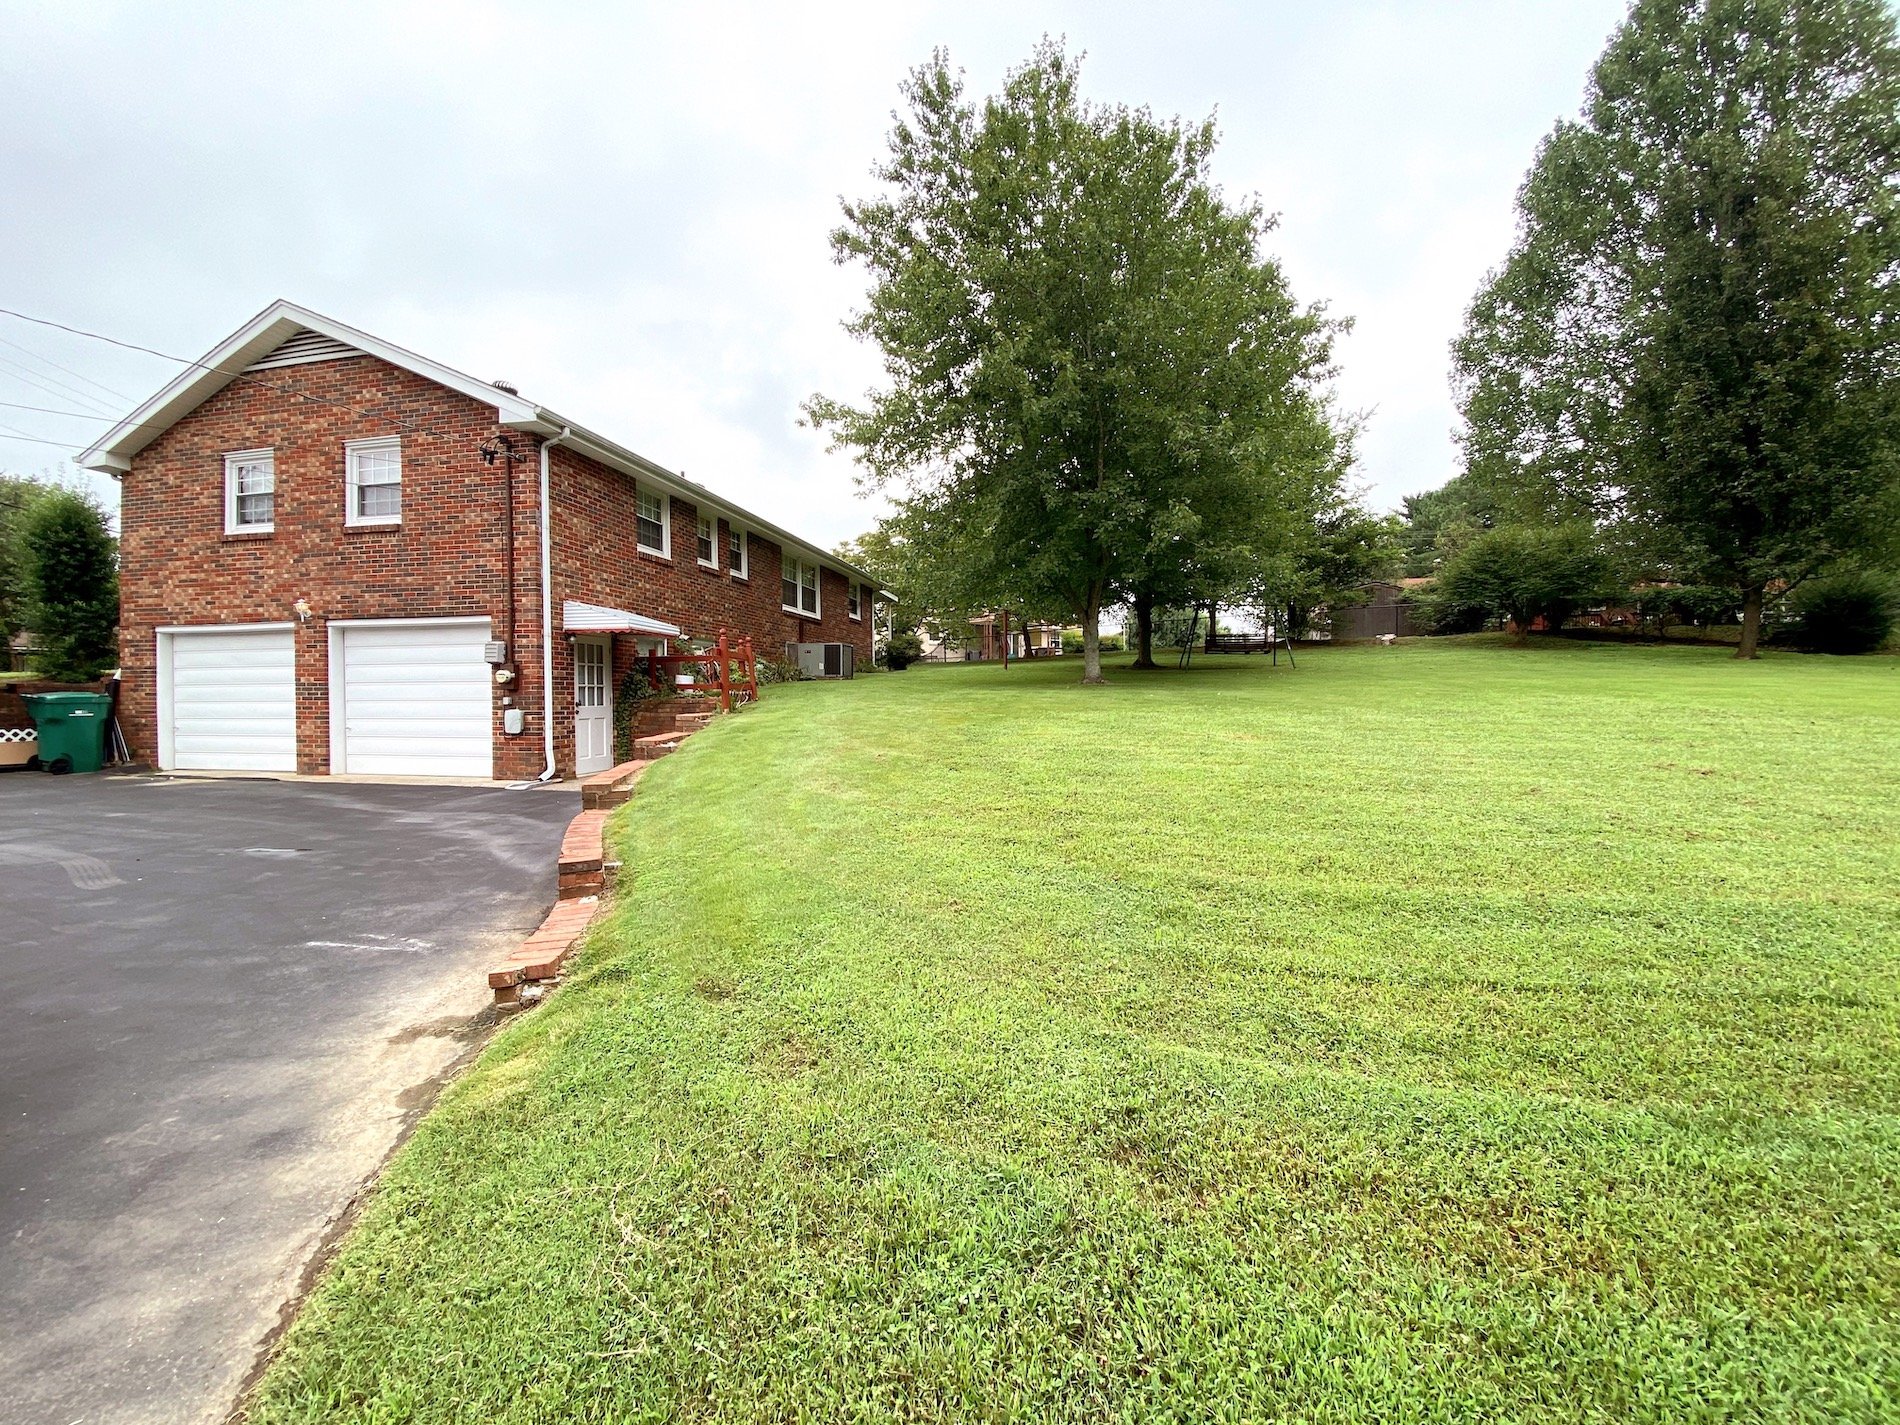 All brick basement home with 2-car garage in Wilson County, TN